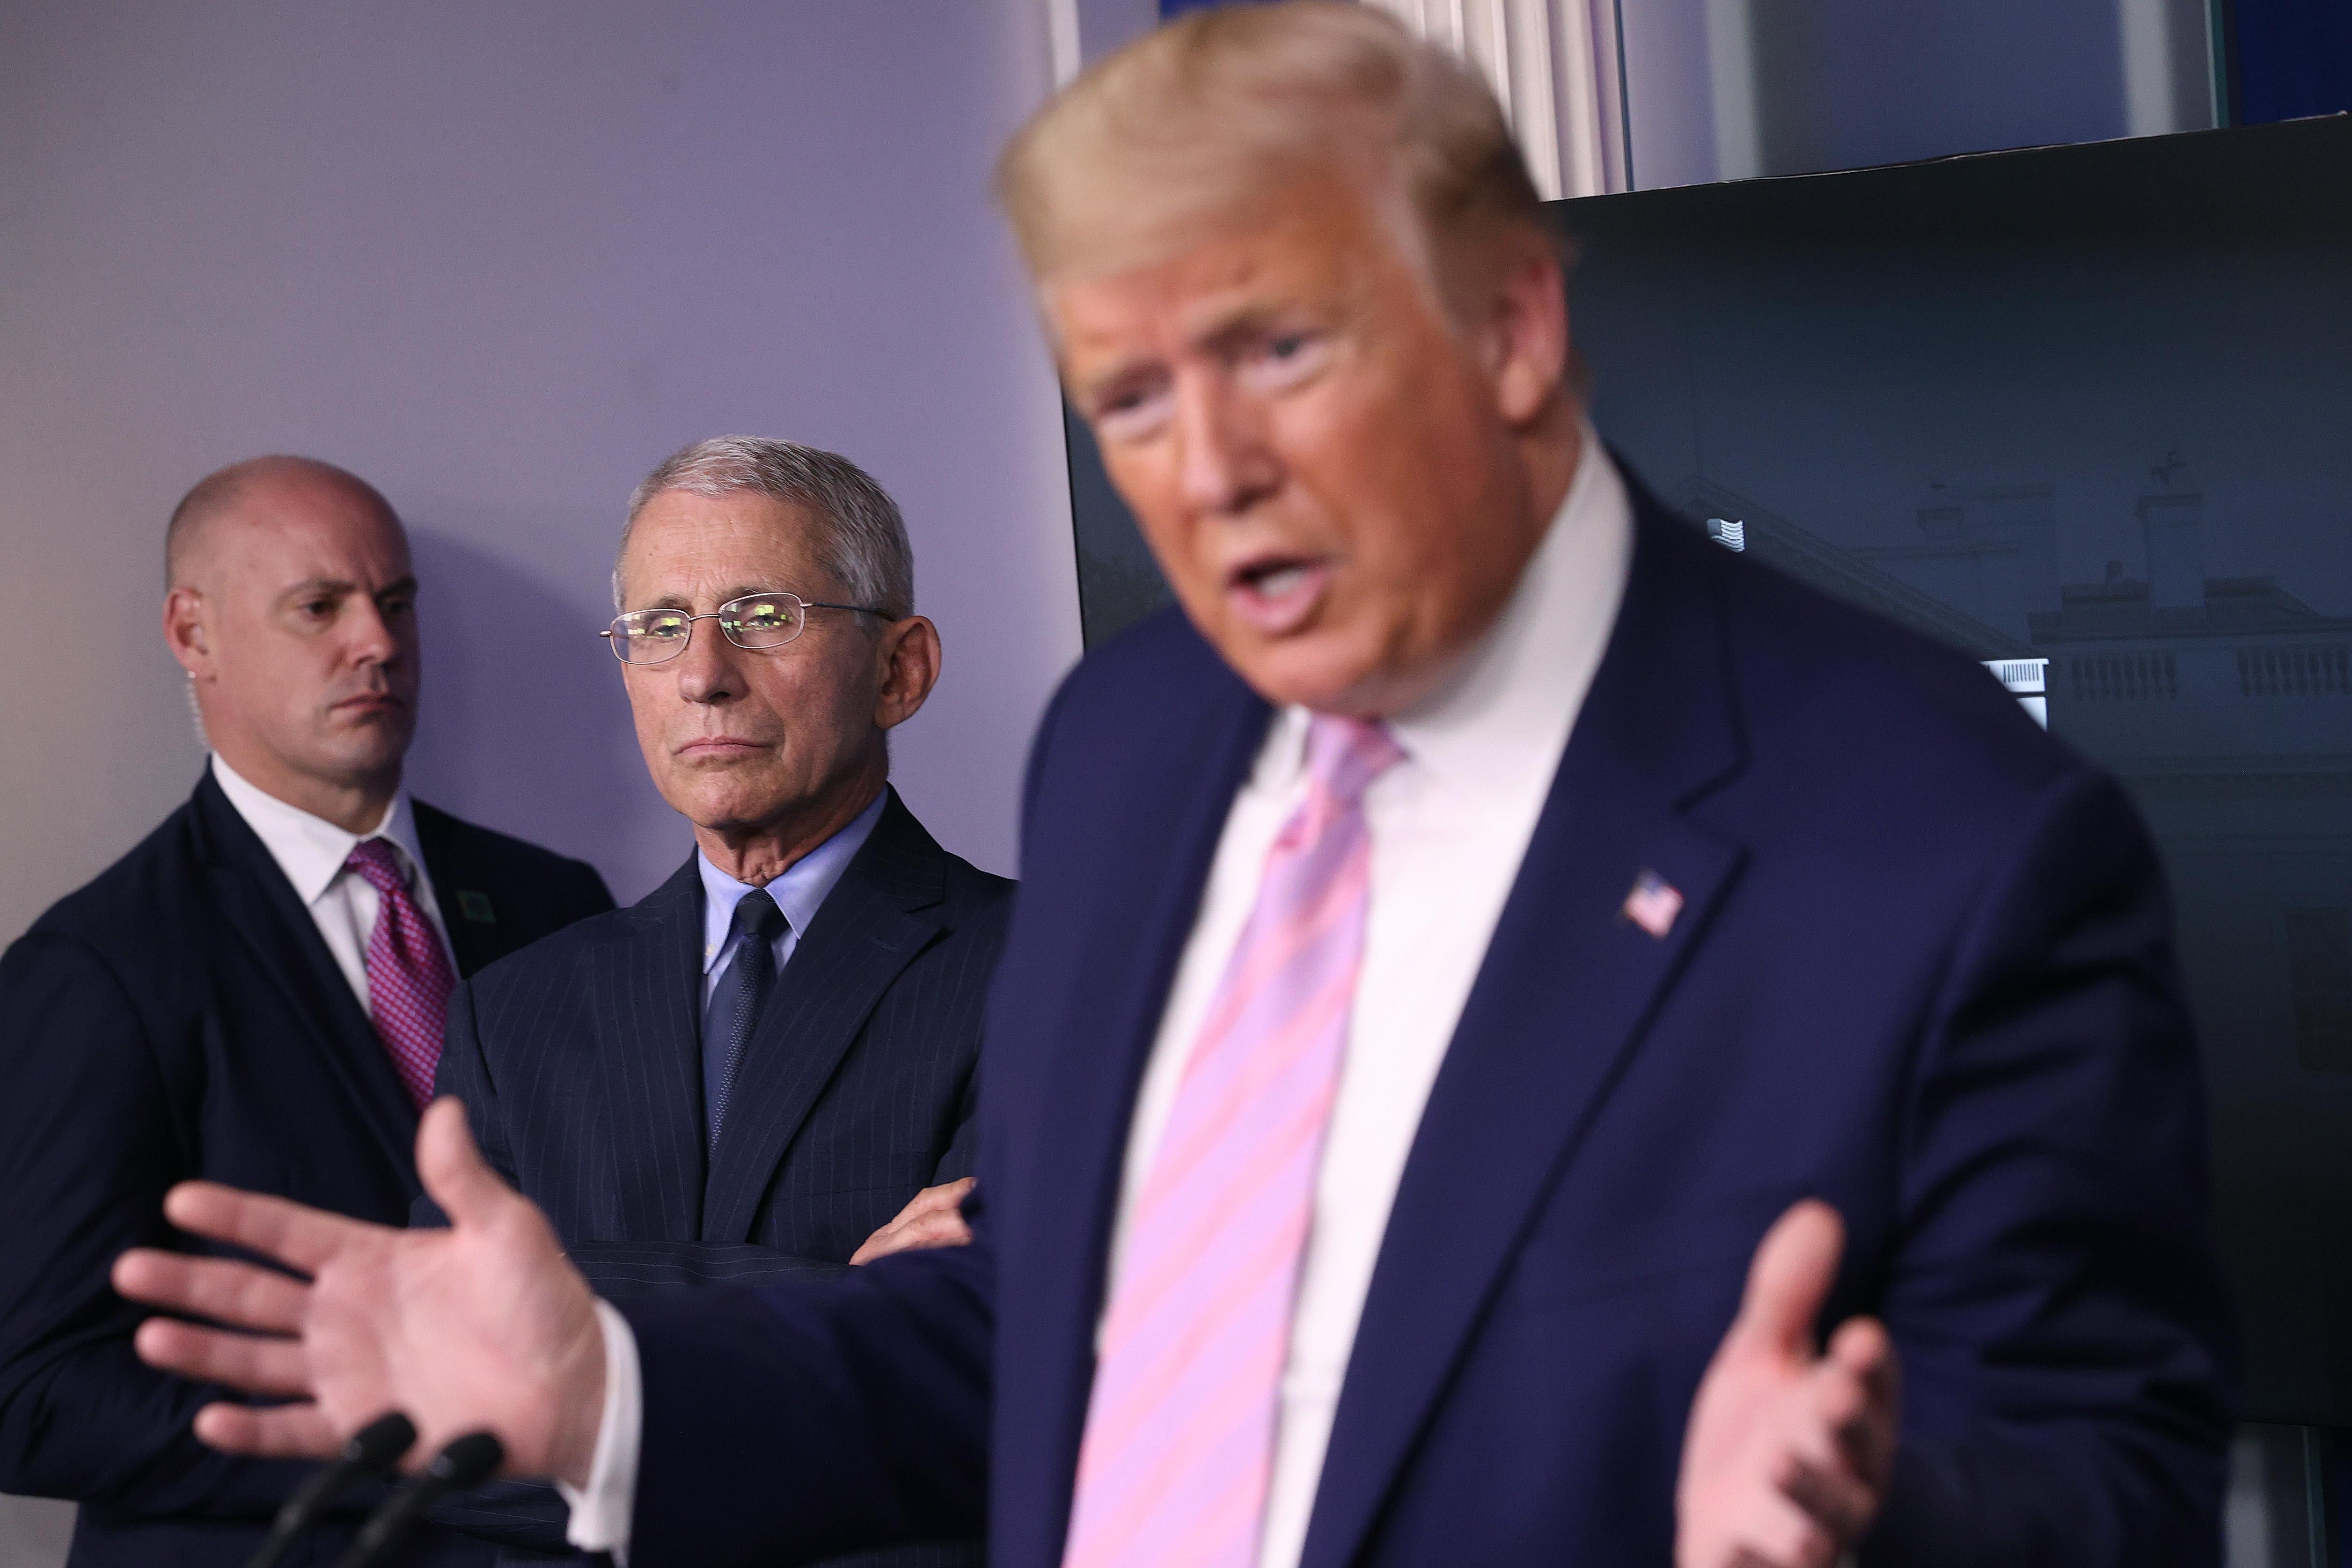 Anthony Fauci, director of the National Institute of Allergy and Infectious Diseases, listens to President Donald Trump speak from the press briefing room with members of the White House Coronavirus Task Force on April 1, 2020 in Washington, D.C.